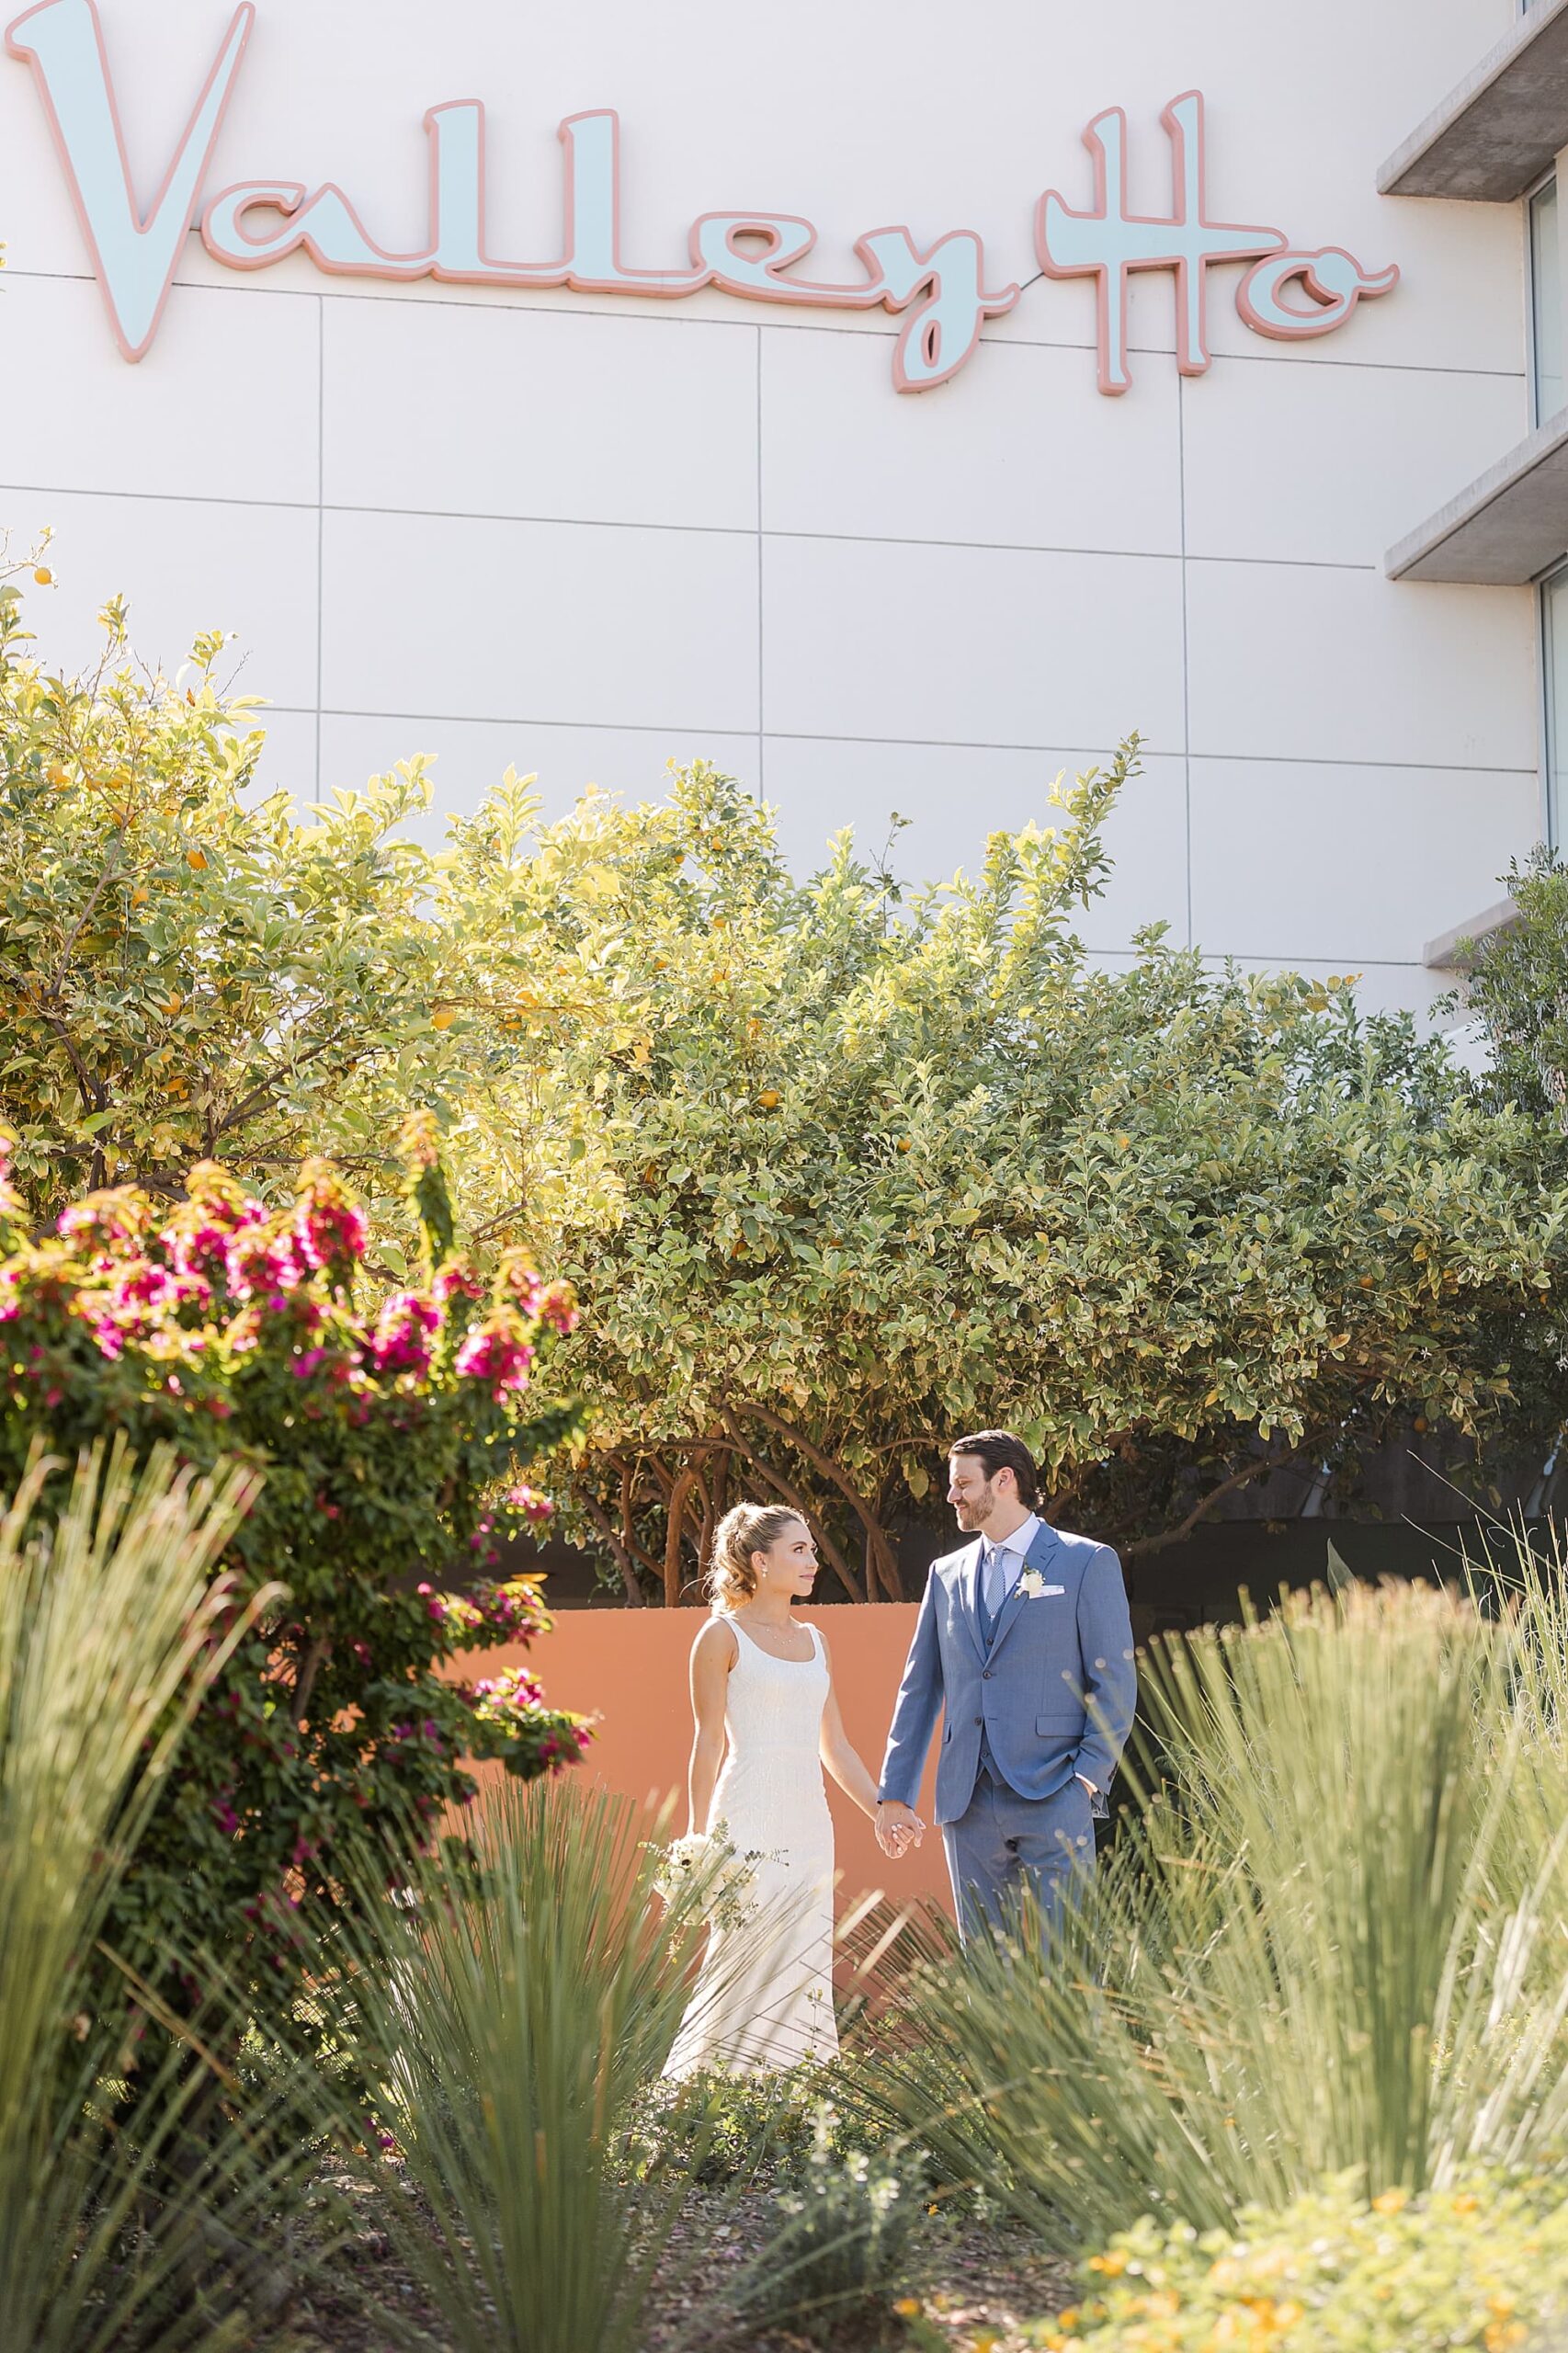 Old Town Scottsdale Wedding at Hotel Valley Ho couple walking